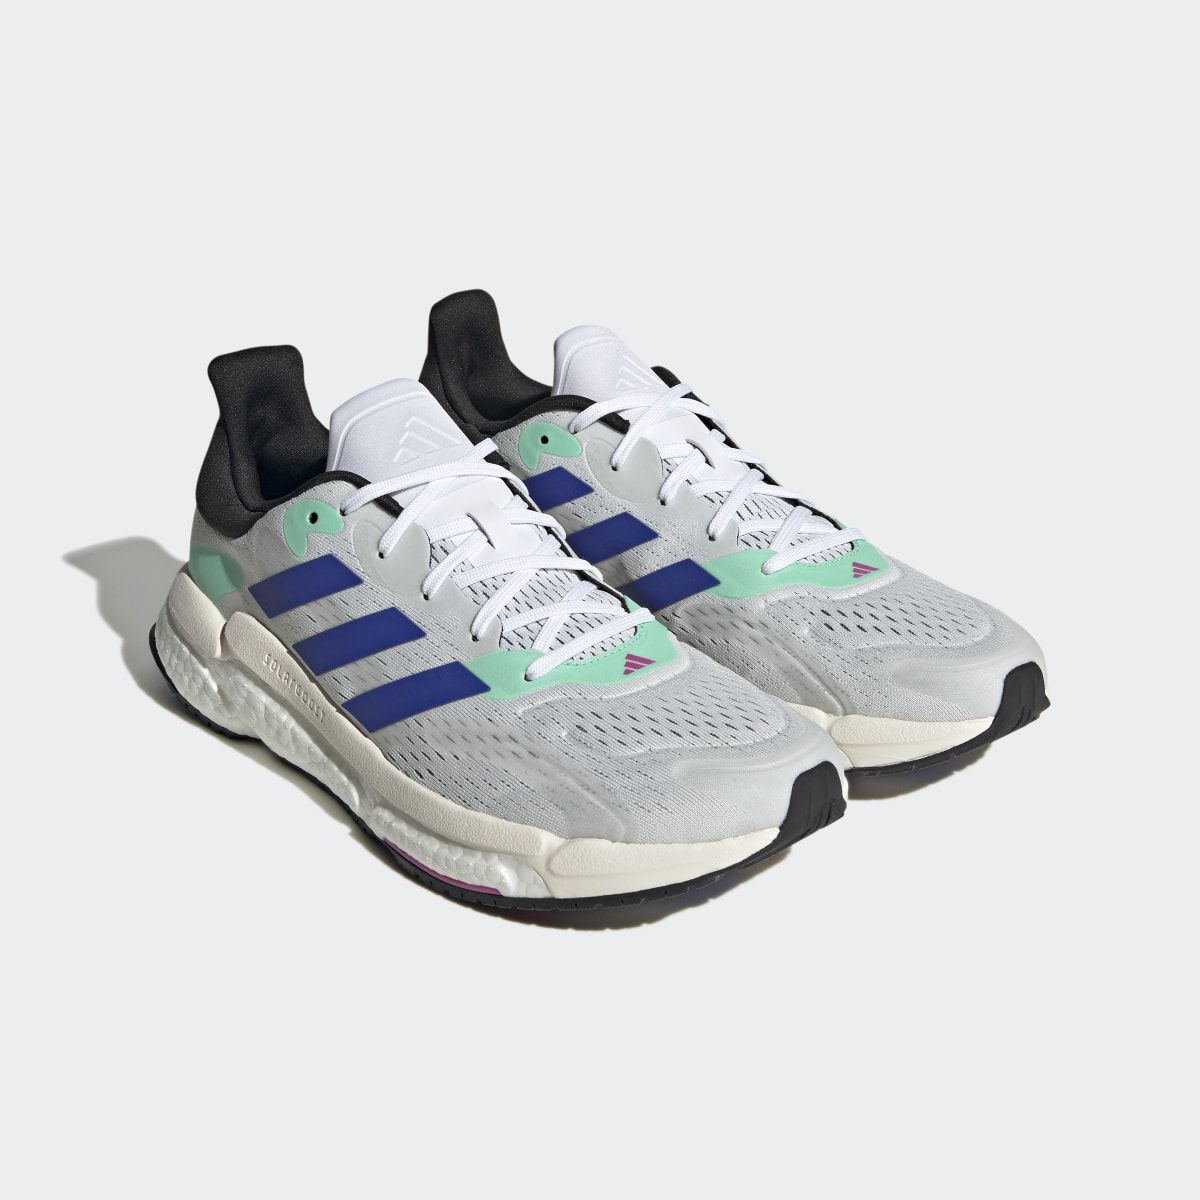 Adidas Solarboost 4 Shoes. 5